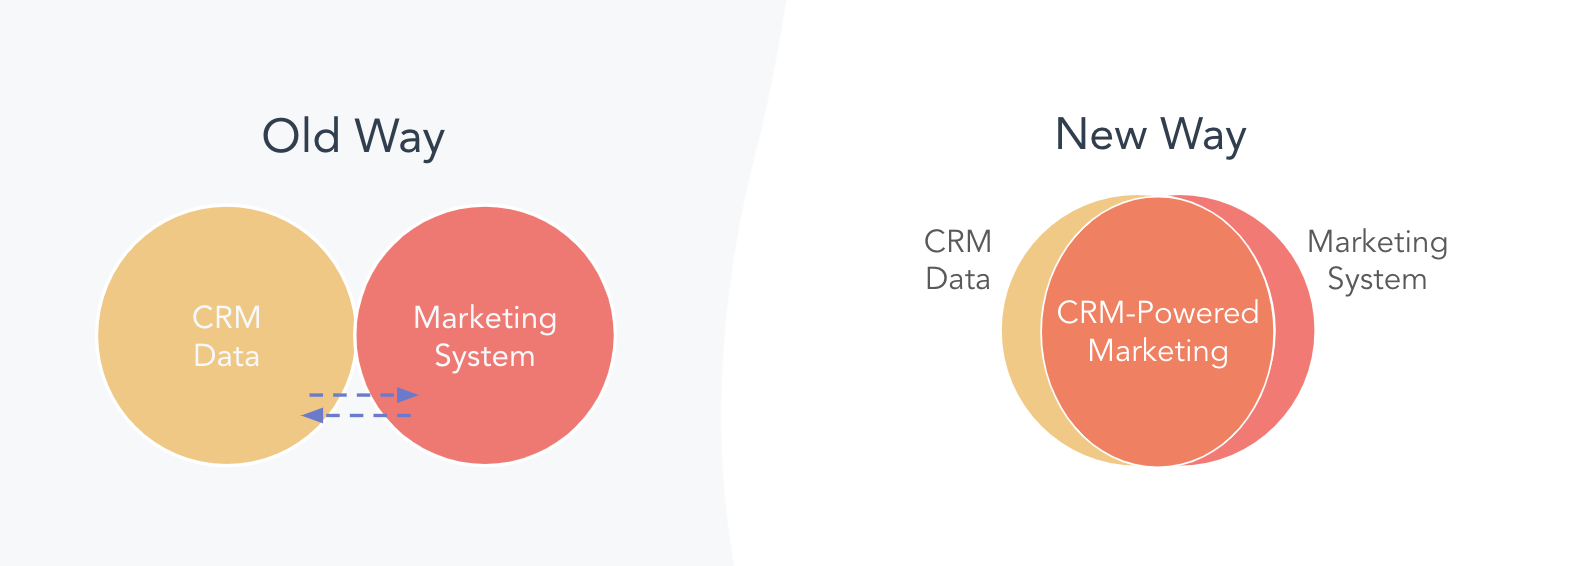 New CRM System 